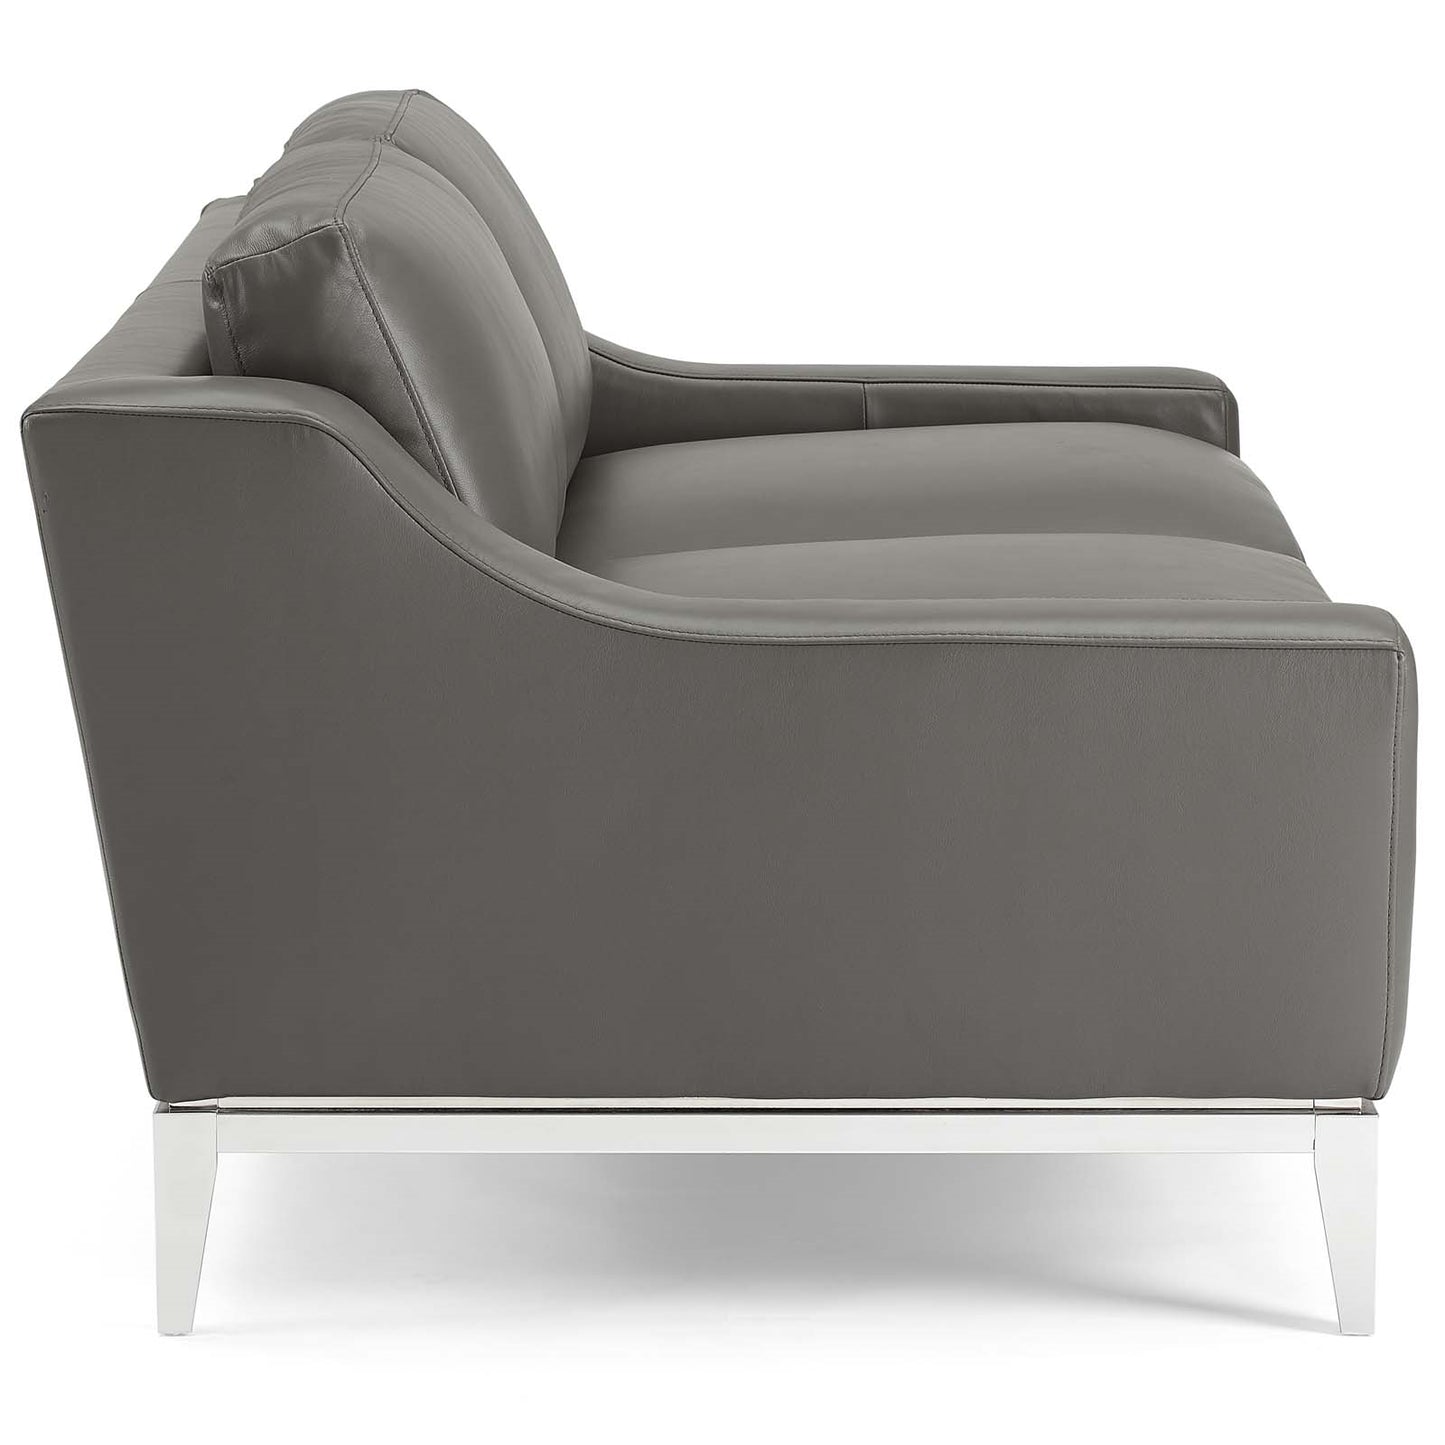 Hermione 64" Stainless Steel Base Leather Loveseat in Gray